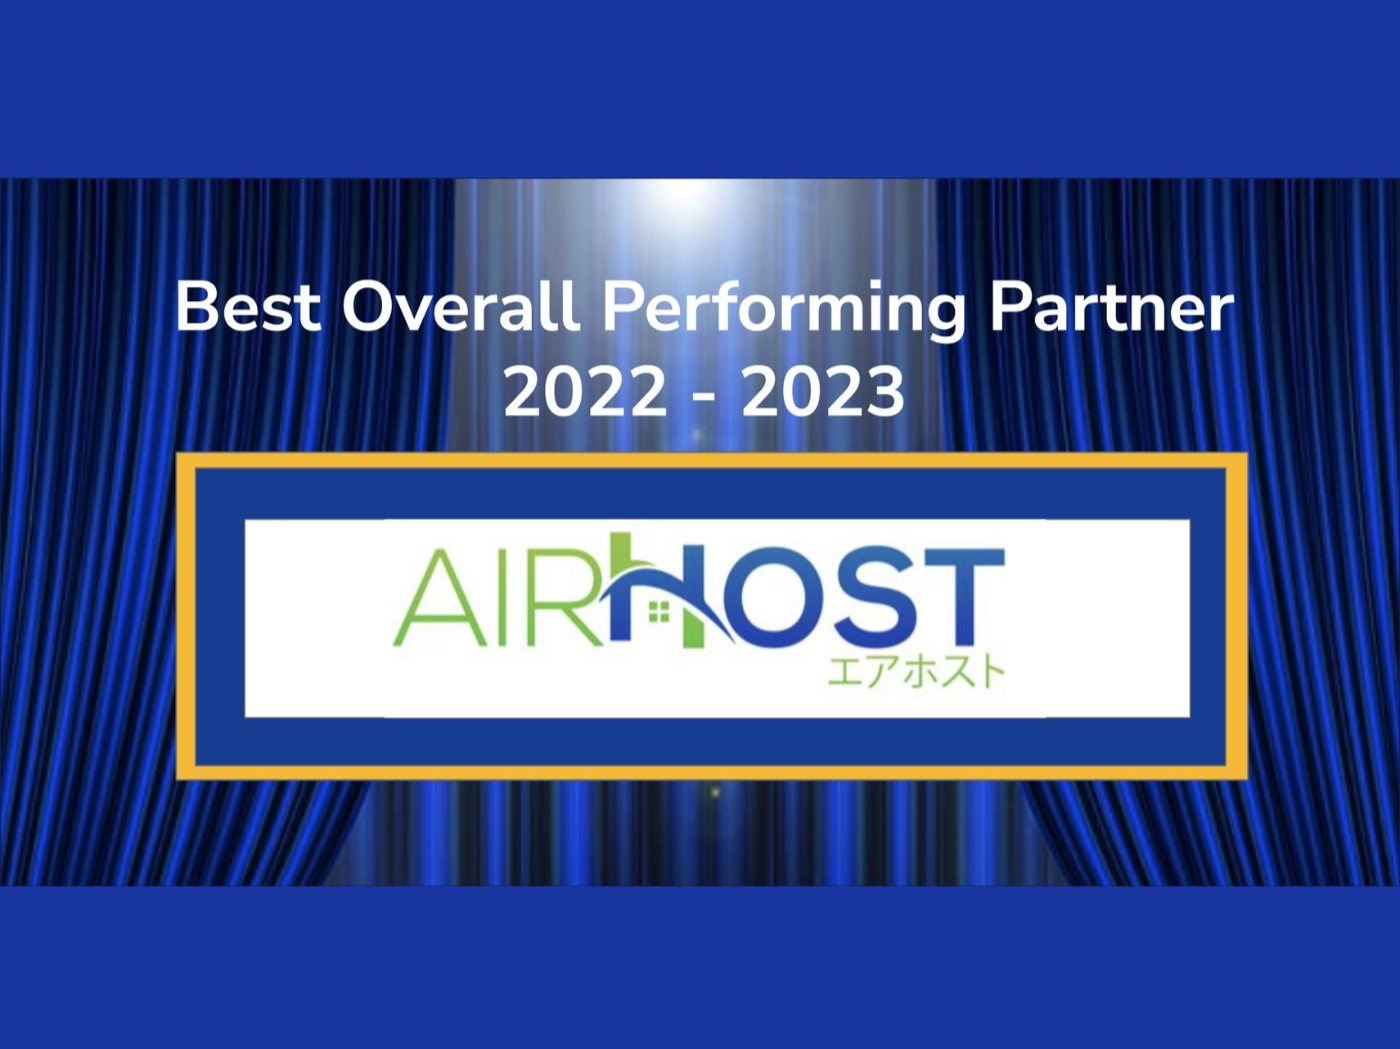 AirHost Honored With “Best Overall Performing Partner” Award by Booking.com